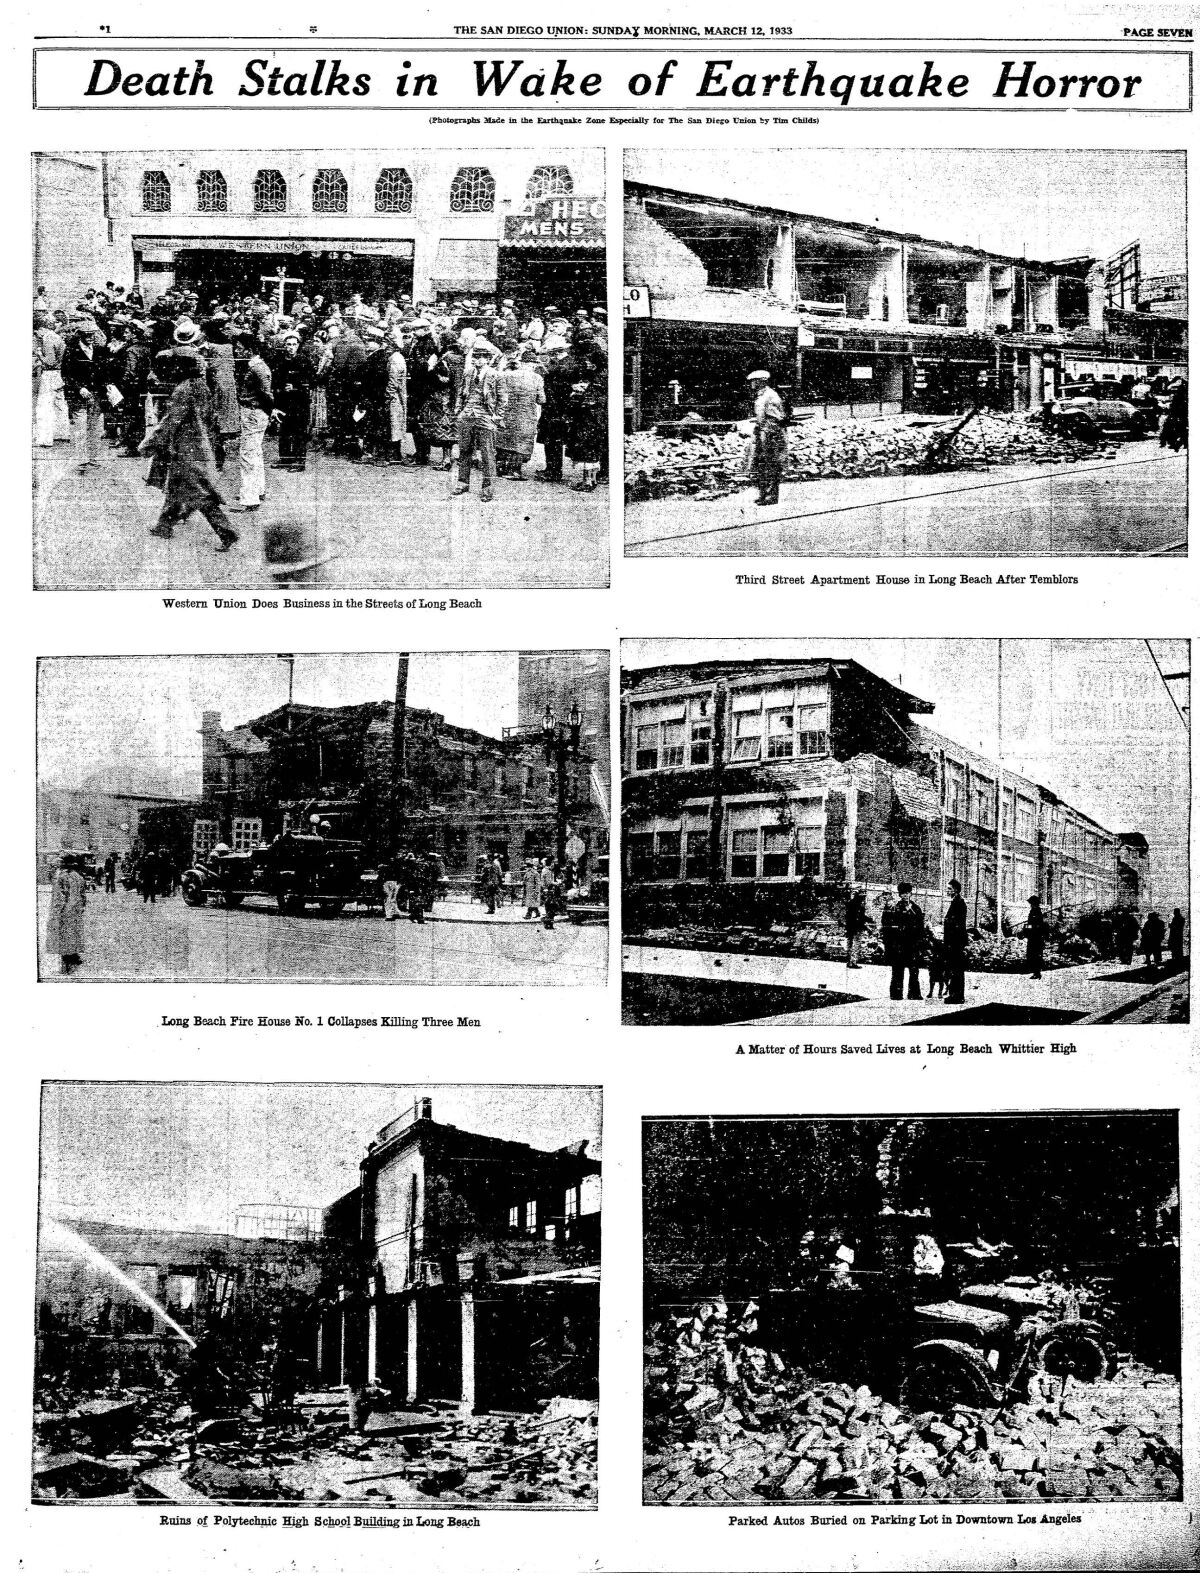 Page of images of the aftermath of the 1933 Long Beach earthquake  